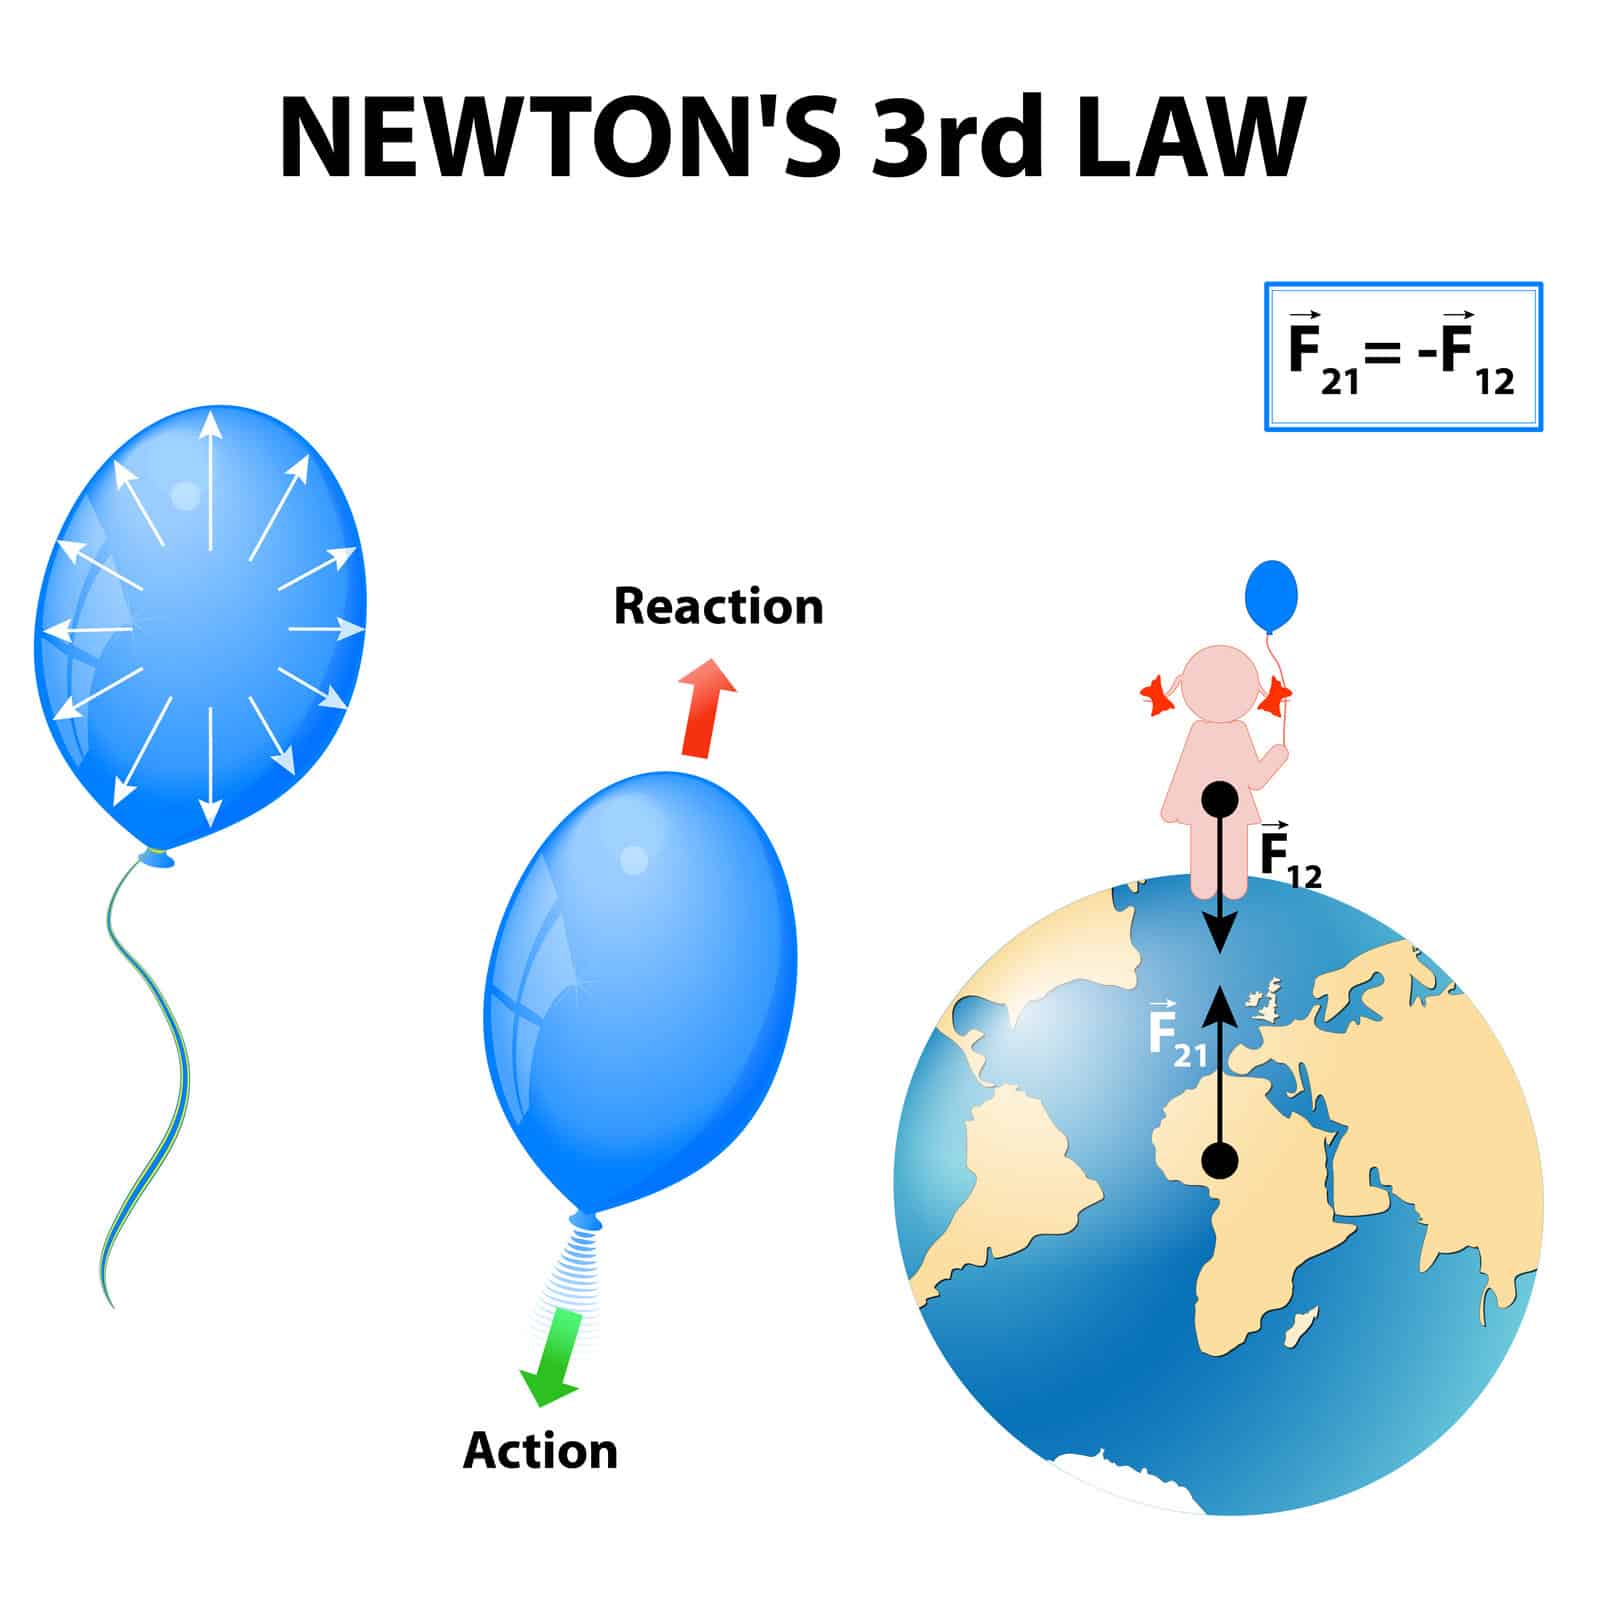 The third laws of motion